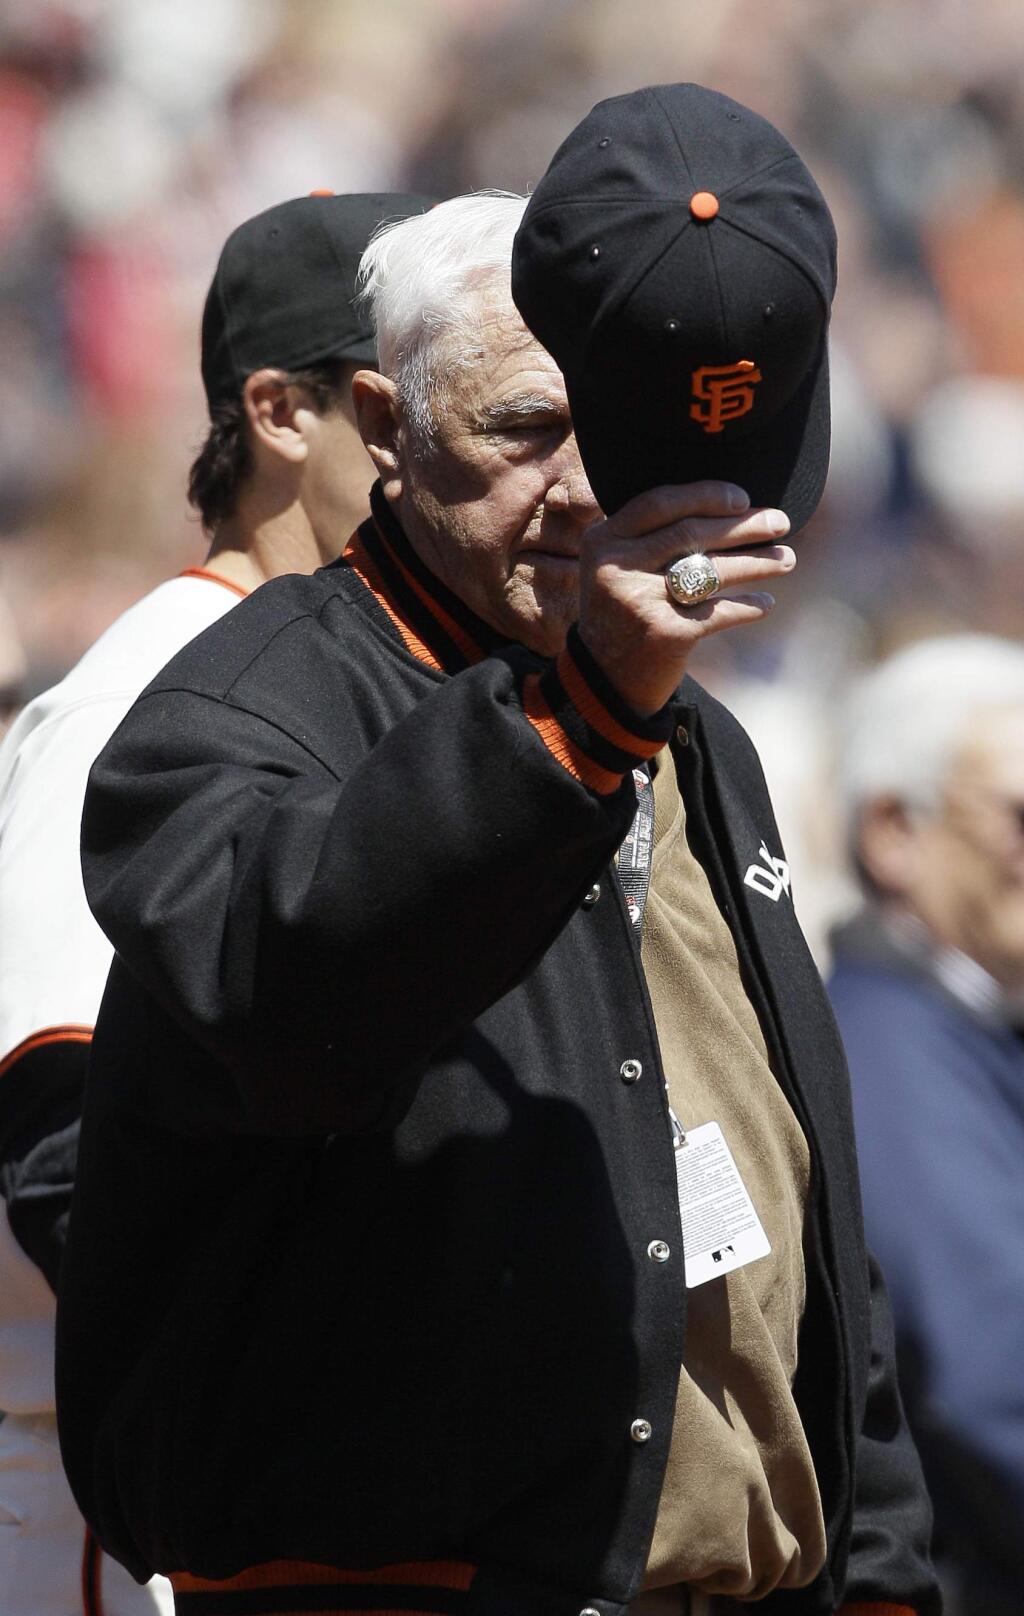 In this April 13, 2012, file photo, former San Francisco Giants player Jim Davenport is shown before a game between the Giants and the Pittsburgh Pirates. (AP Photo/Jeff Chiu, File)